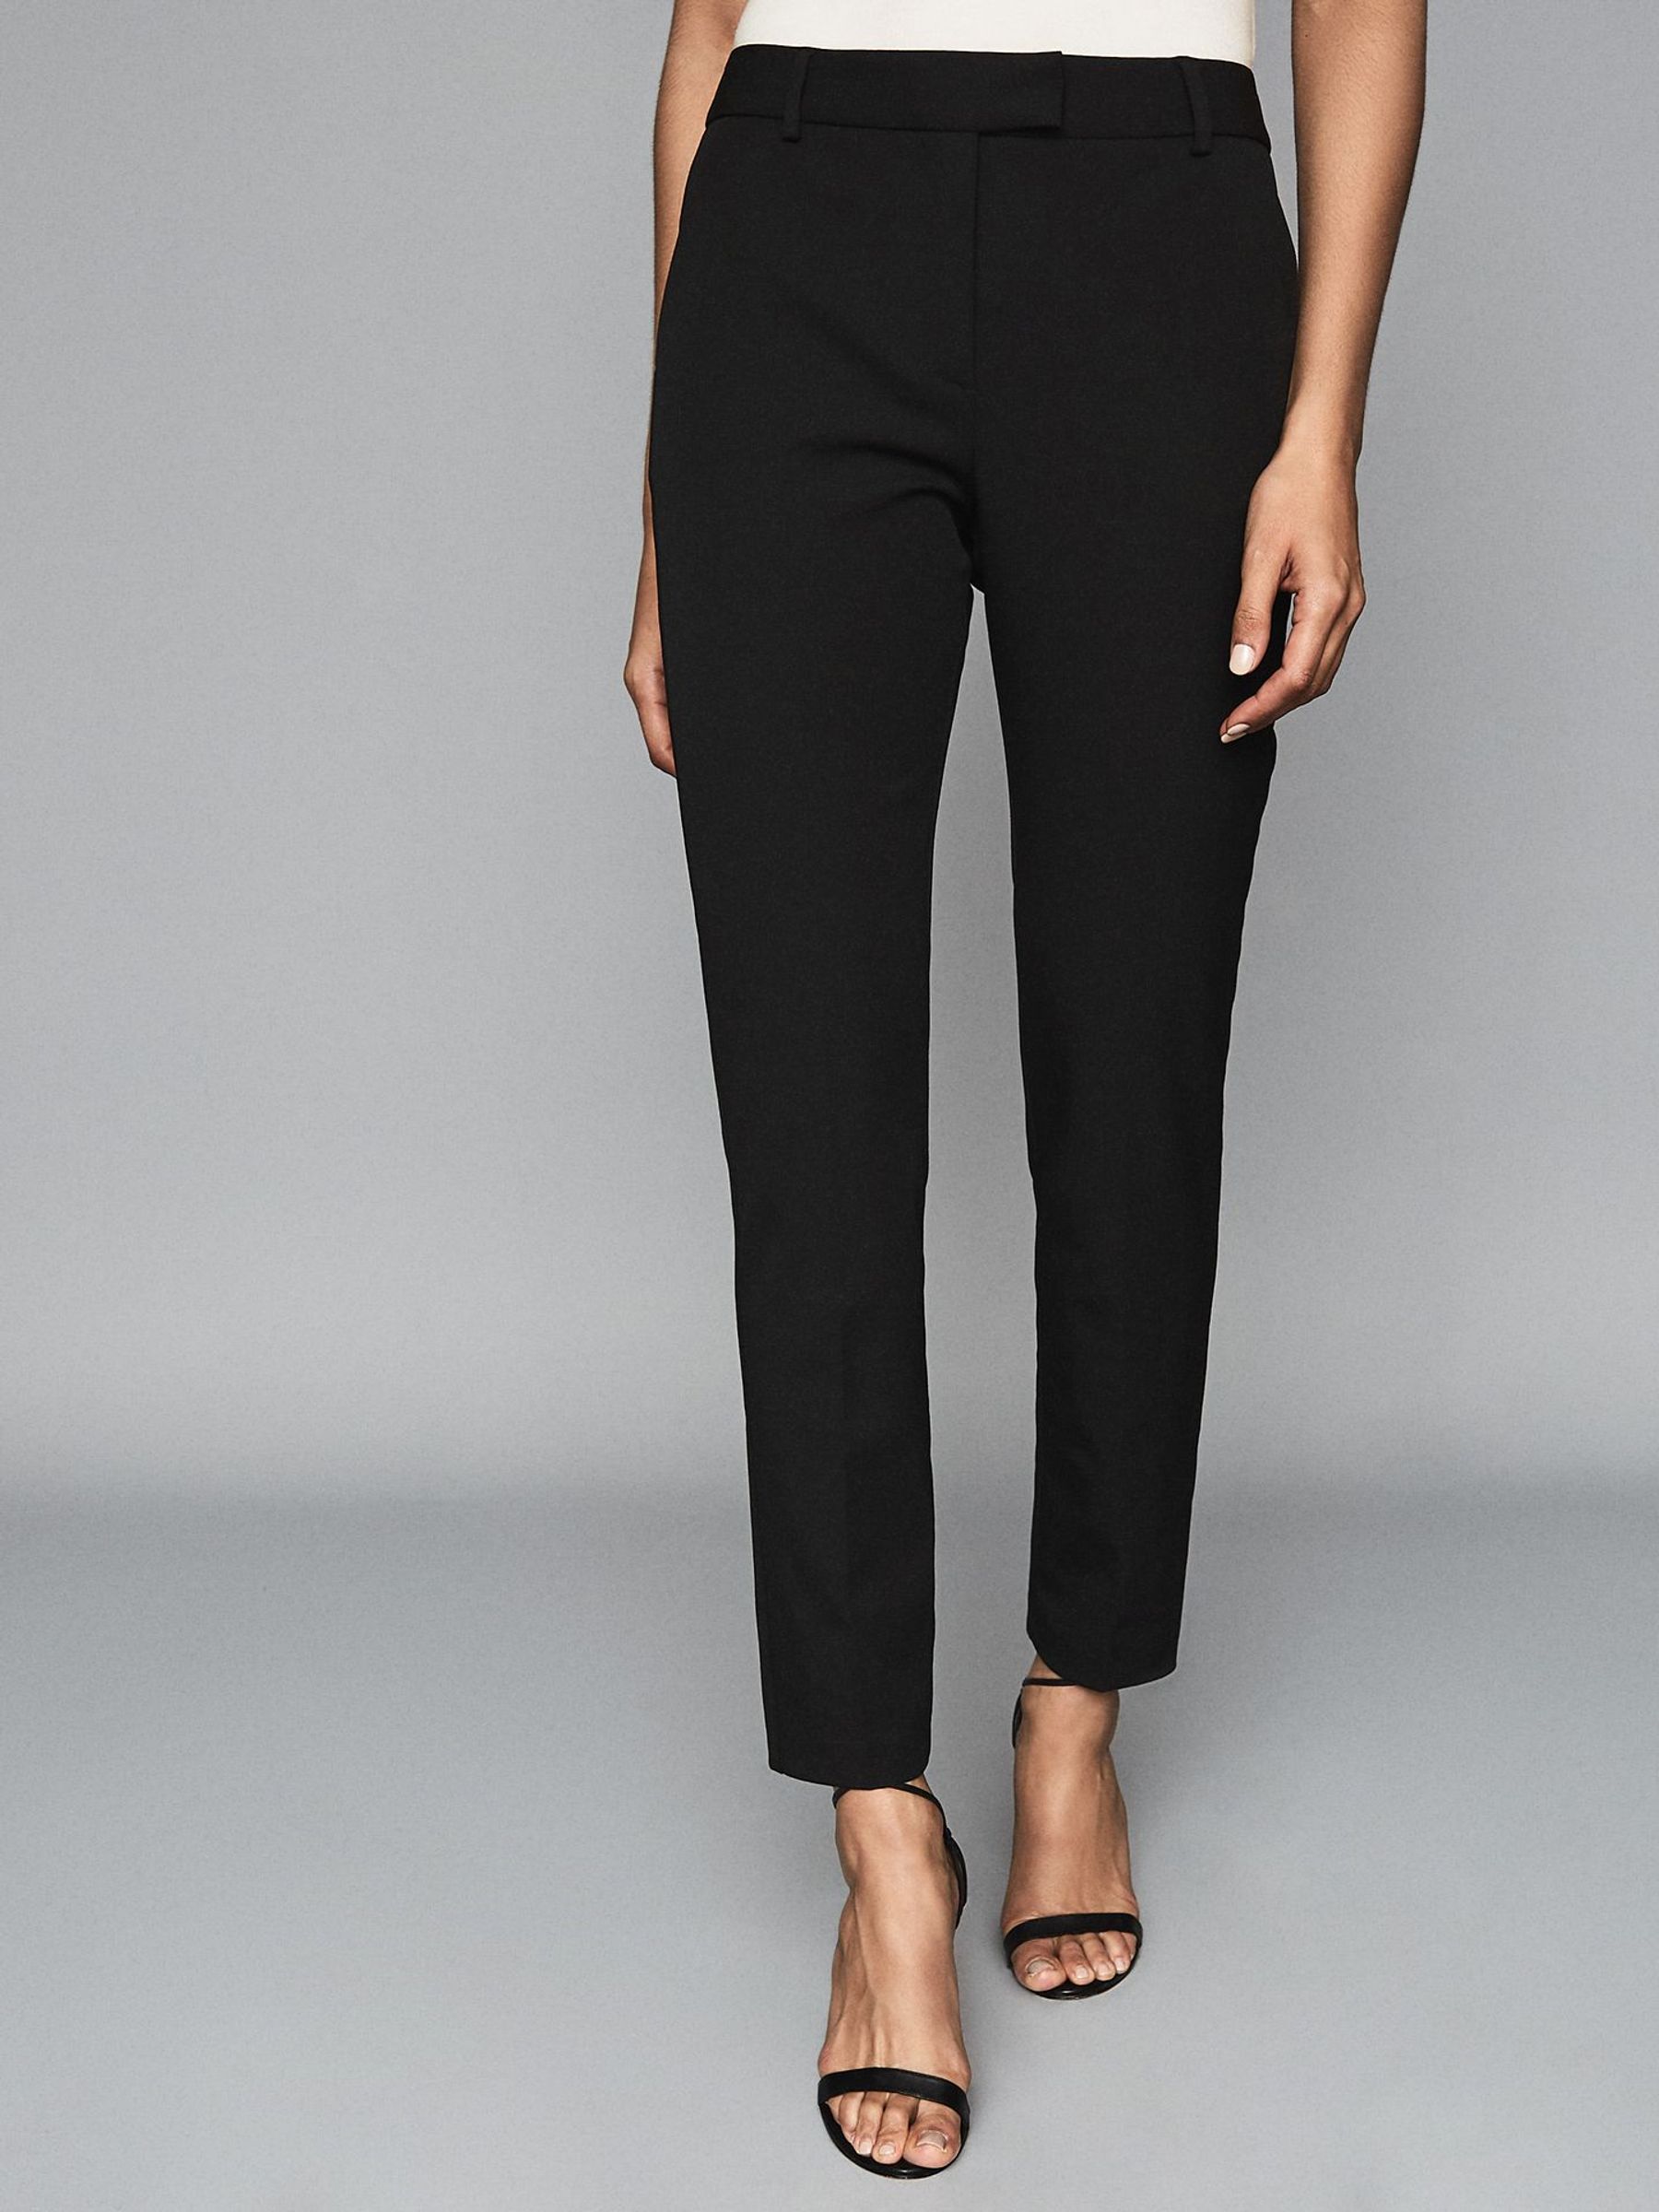 Reiss Joanne Cropped Tailored Trousers - REISS